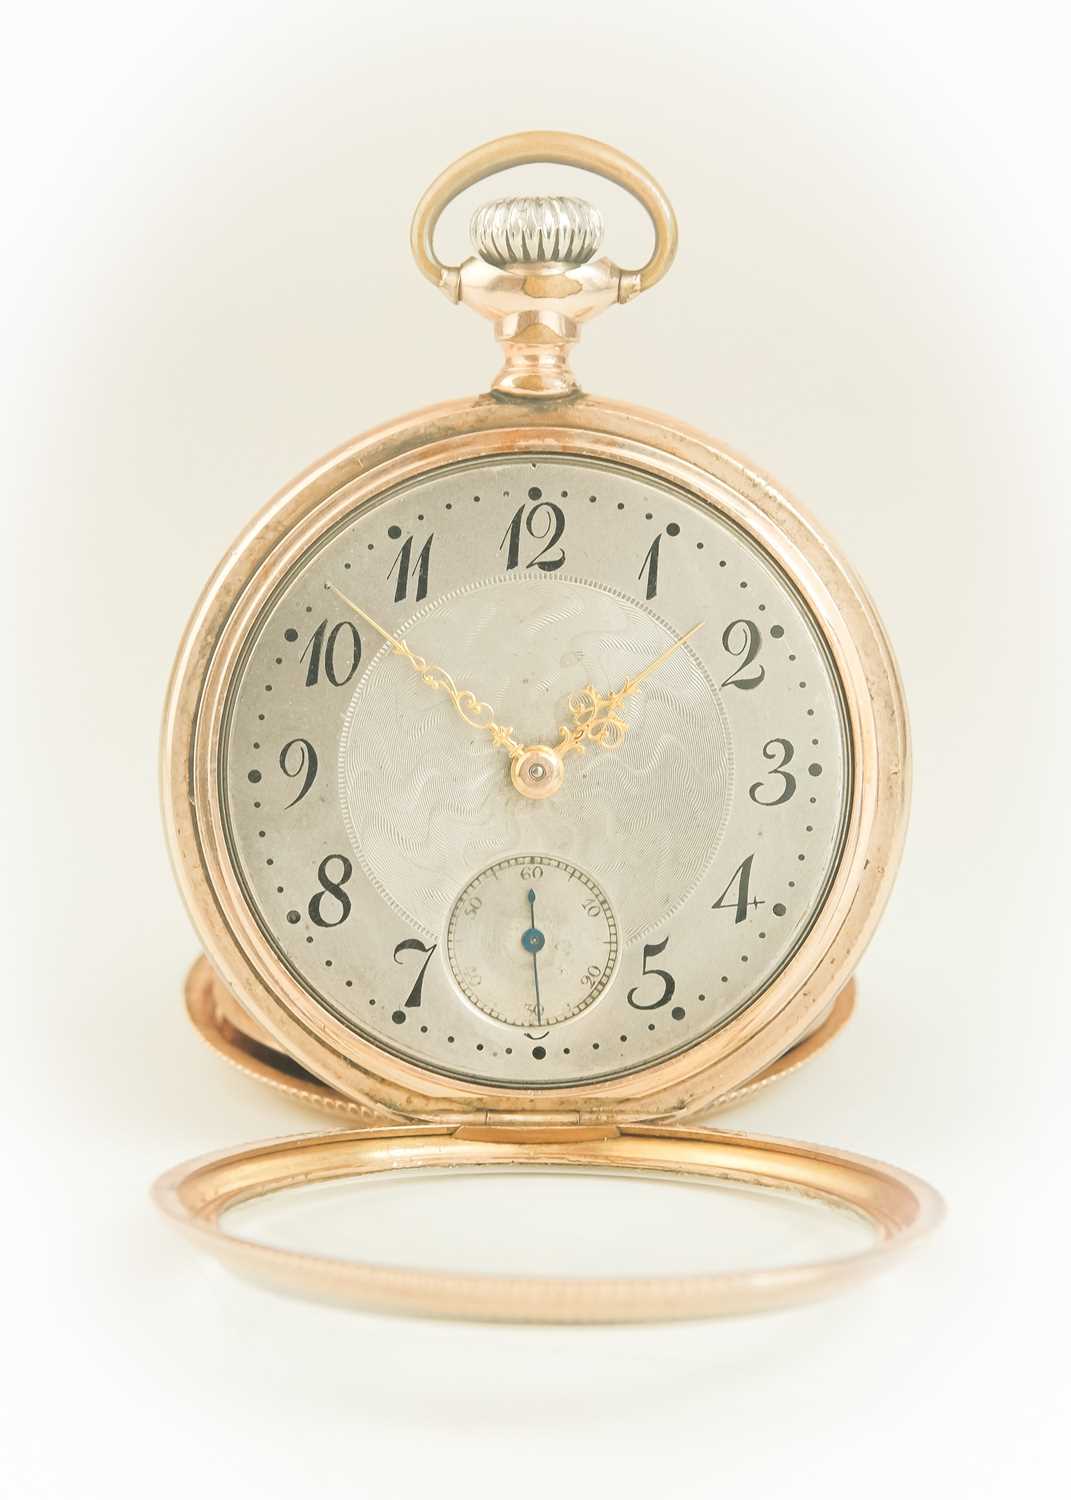 WALTHAM - A rose gold plated crown wind open face pocket watch. - Image 5 of 8